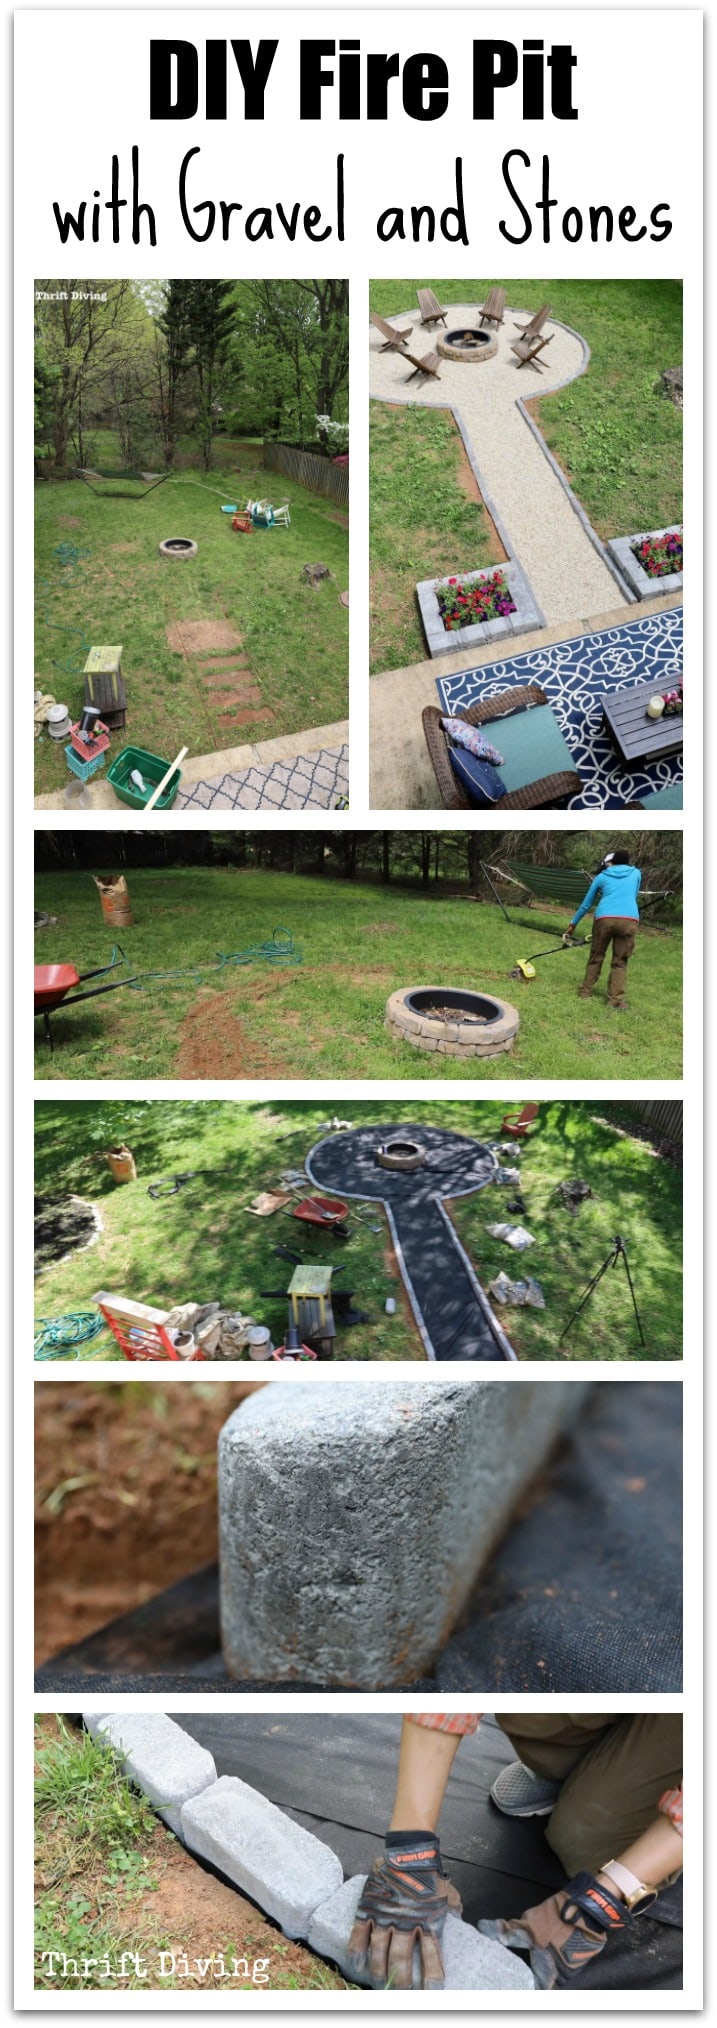 DIY Fire Pit with Gravel and Stones - Thrift Diving Blog